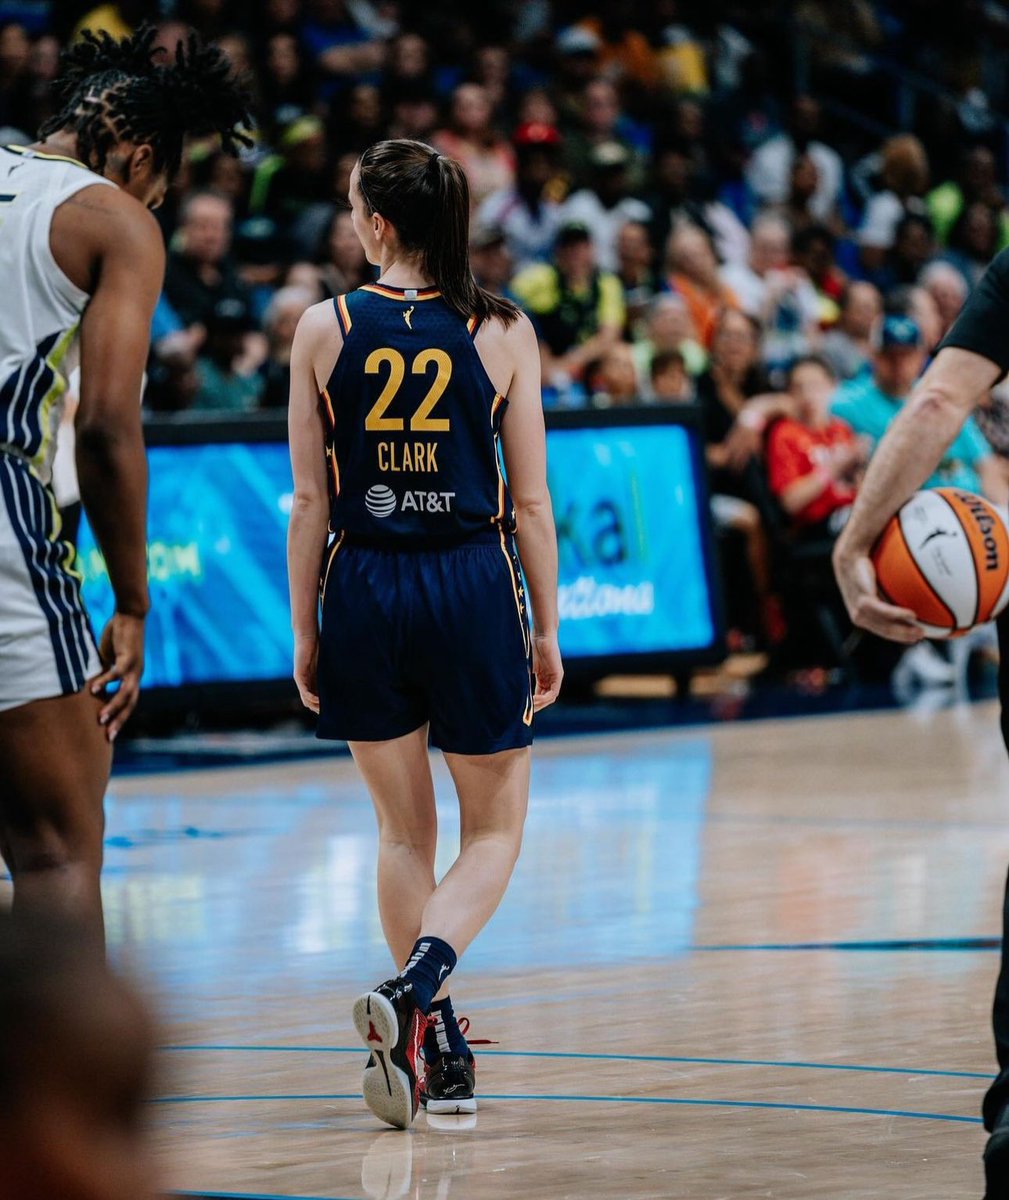 Caitlin Clark tonight in her WNBA debut:

20 PTS
3 AST
2 STL
4 3PM

Only the beginning 🔥🔥